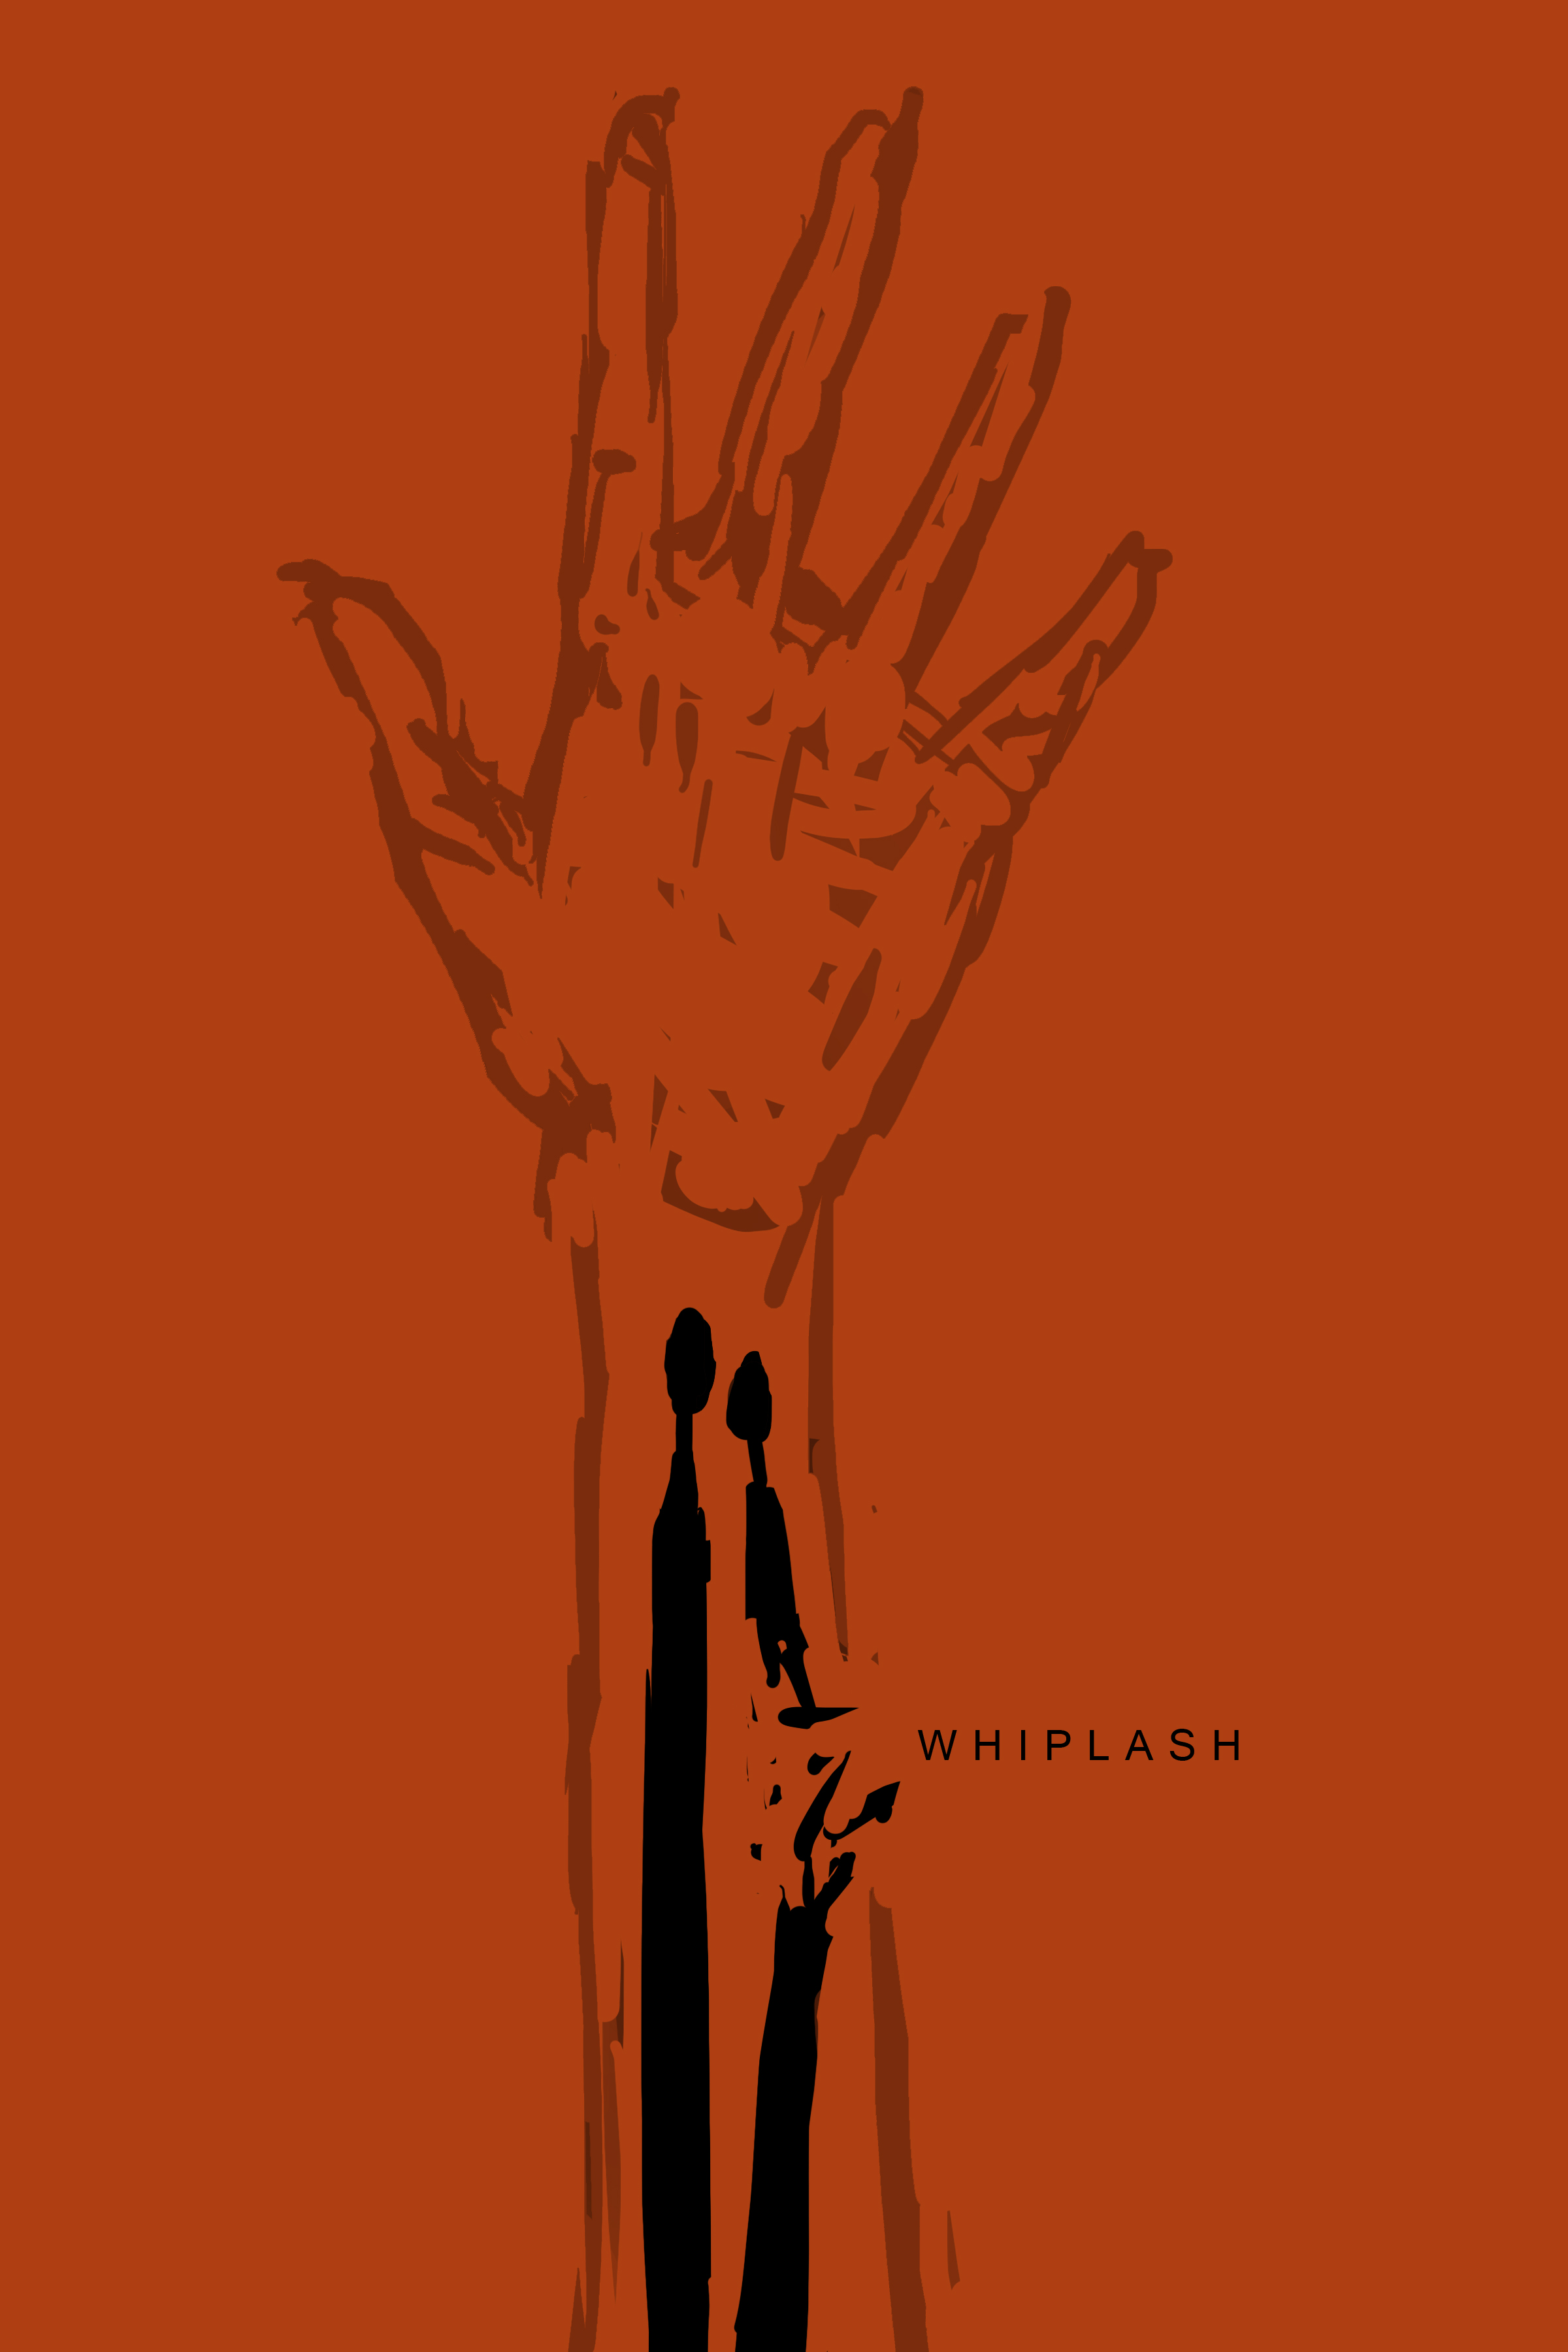 Whiplash Poster. Movie posters design, Movie poster art, Movie posters